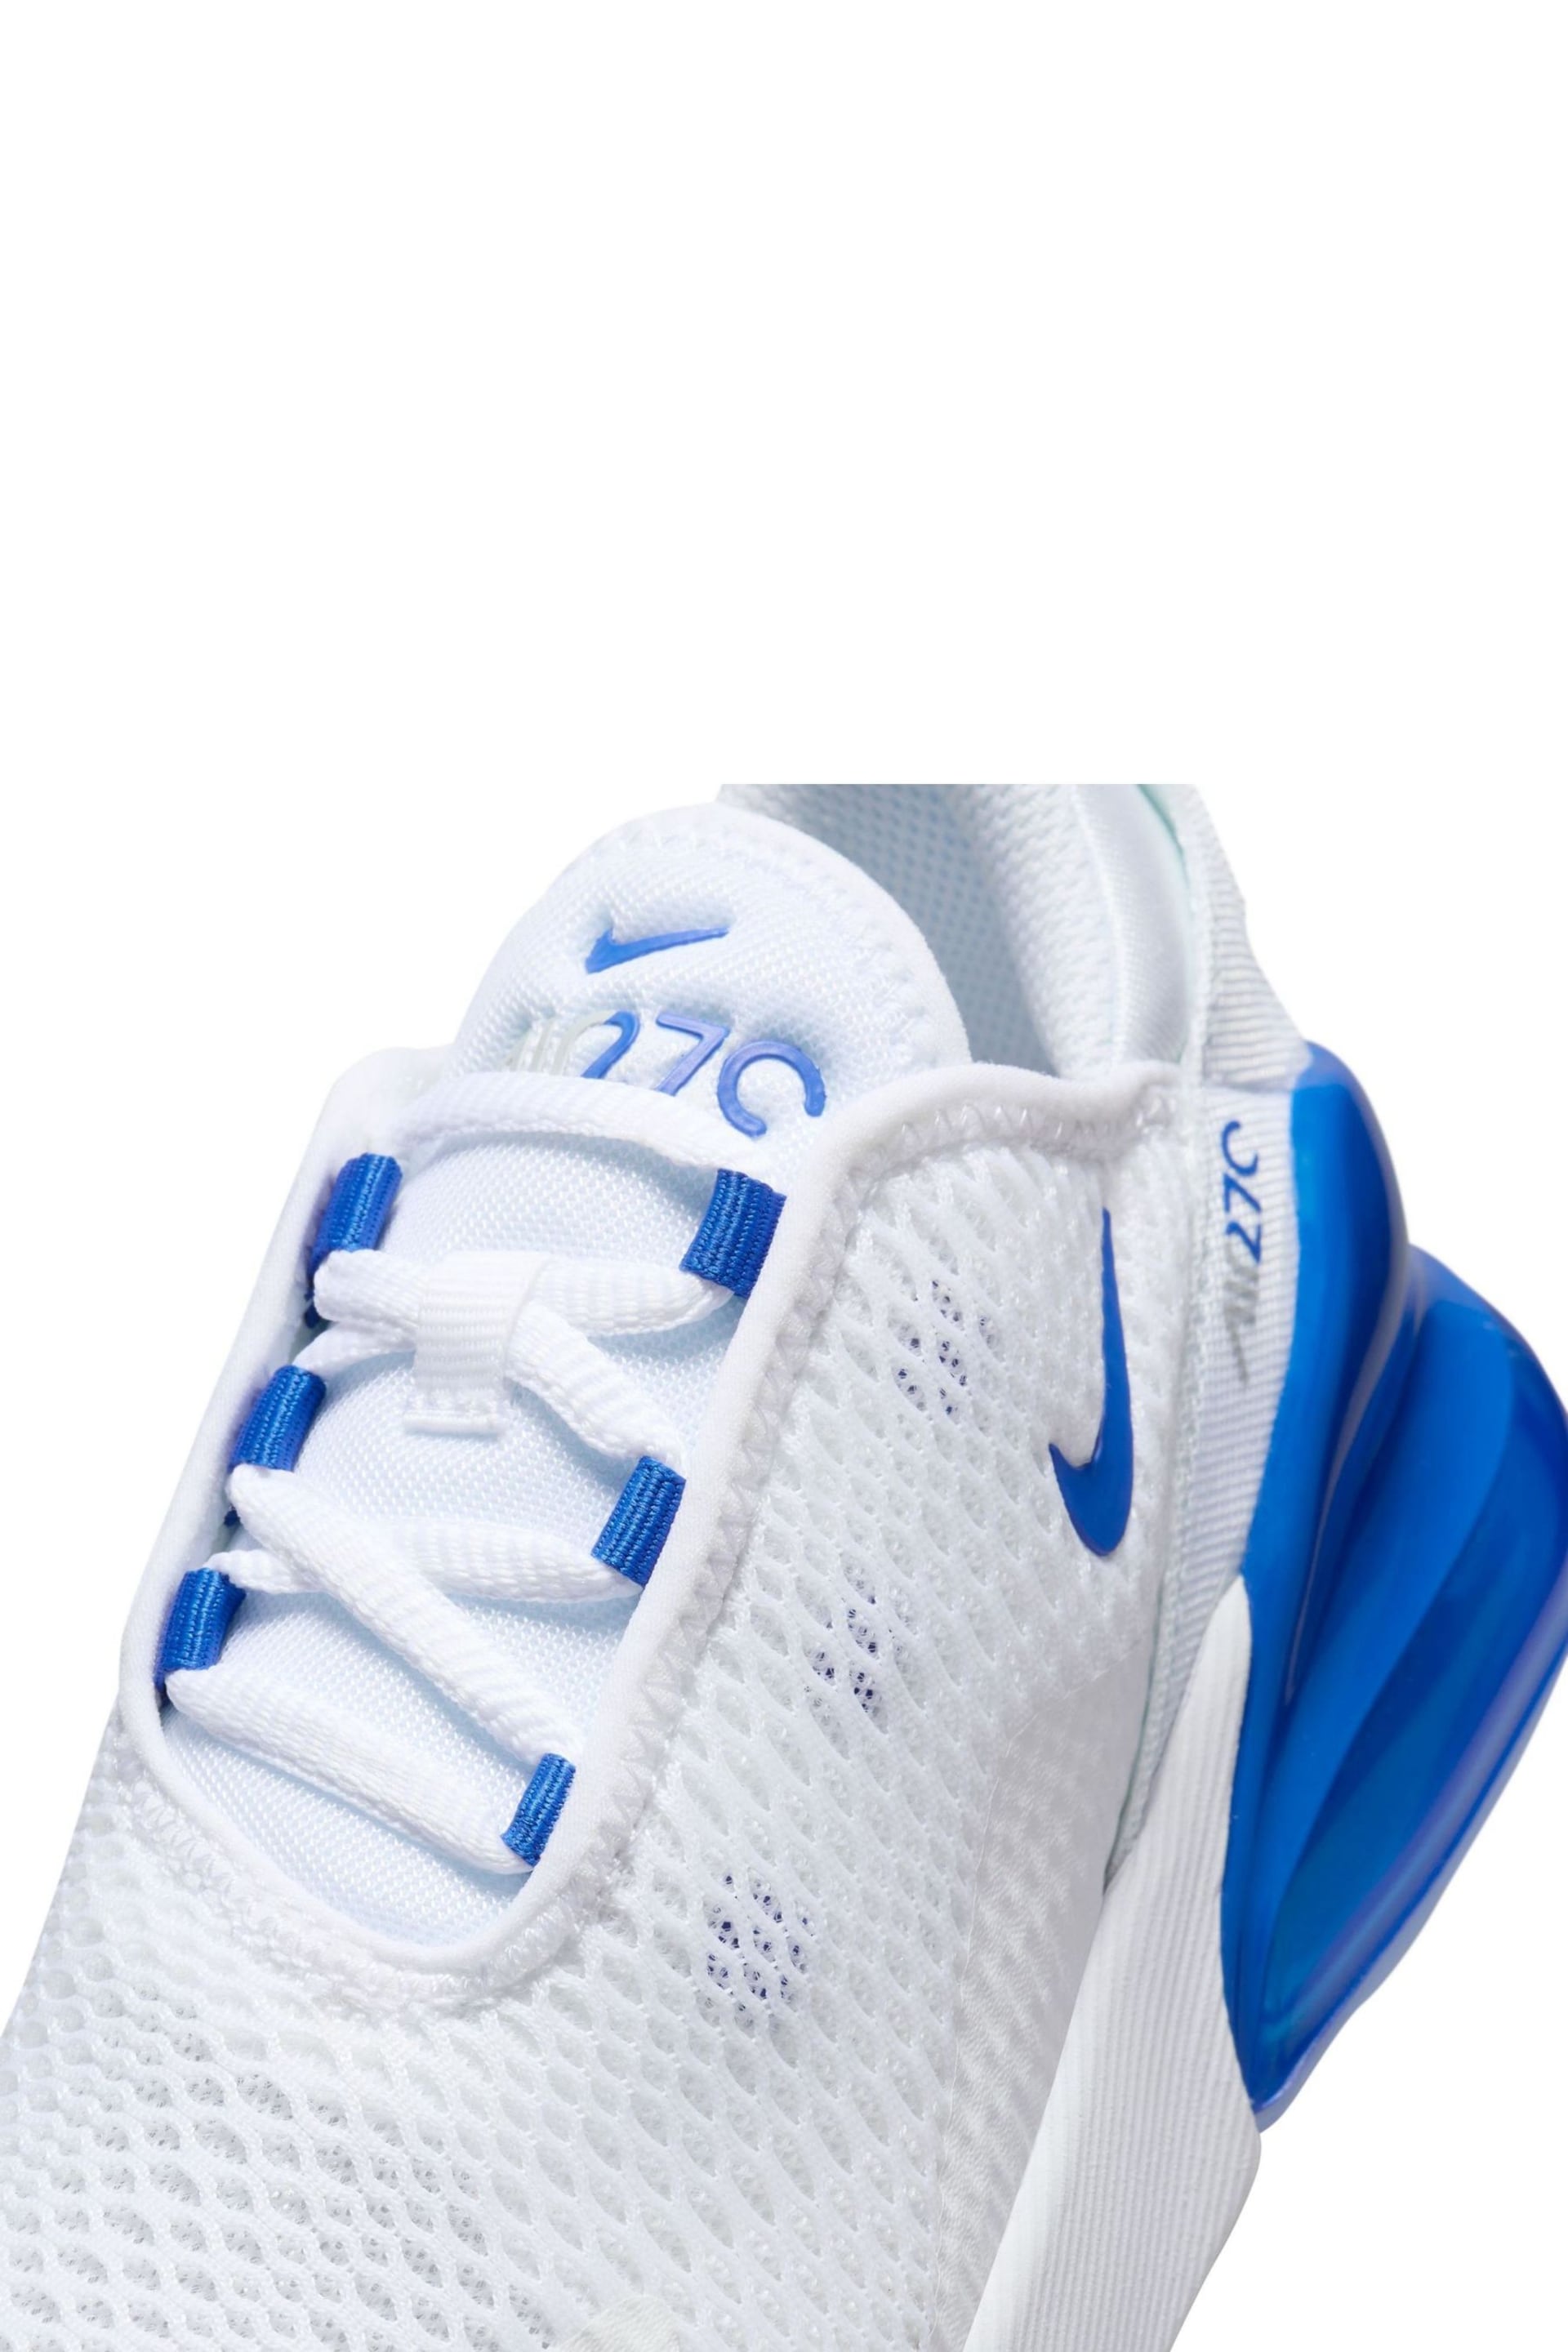 Nike White/Royal Blue Air Max 270 Junior Trainers - Image 8 of 10